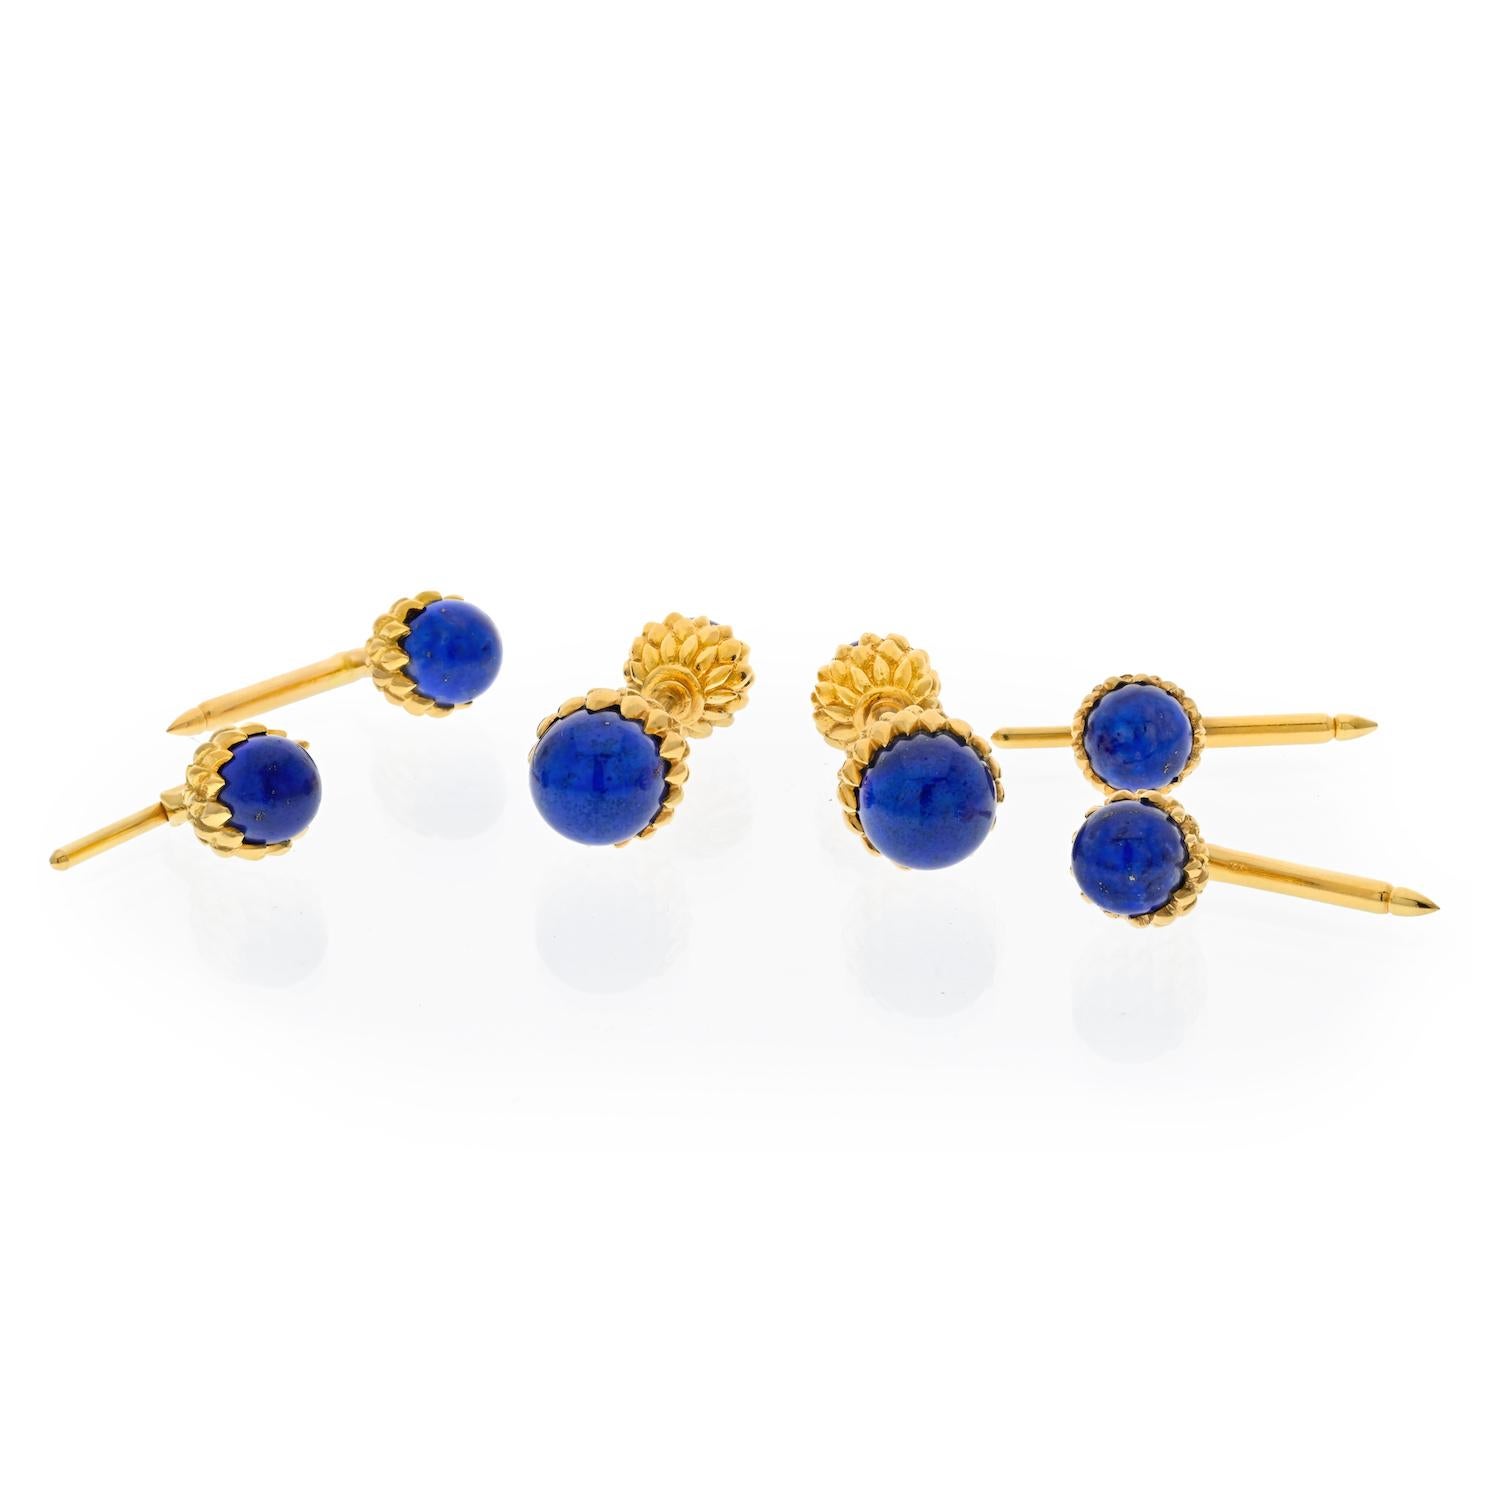 Comprised of a pair of cufflinks and four shirt studs; crafted in 18K gold; featuring lapis lazuli cabochons; cufflink fronts measure 7/16 inch and backs measure 3/8 inch, studs measure 3/8 inch; weight 30.30 g.
Signed: SCHLUMBERGER 